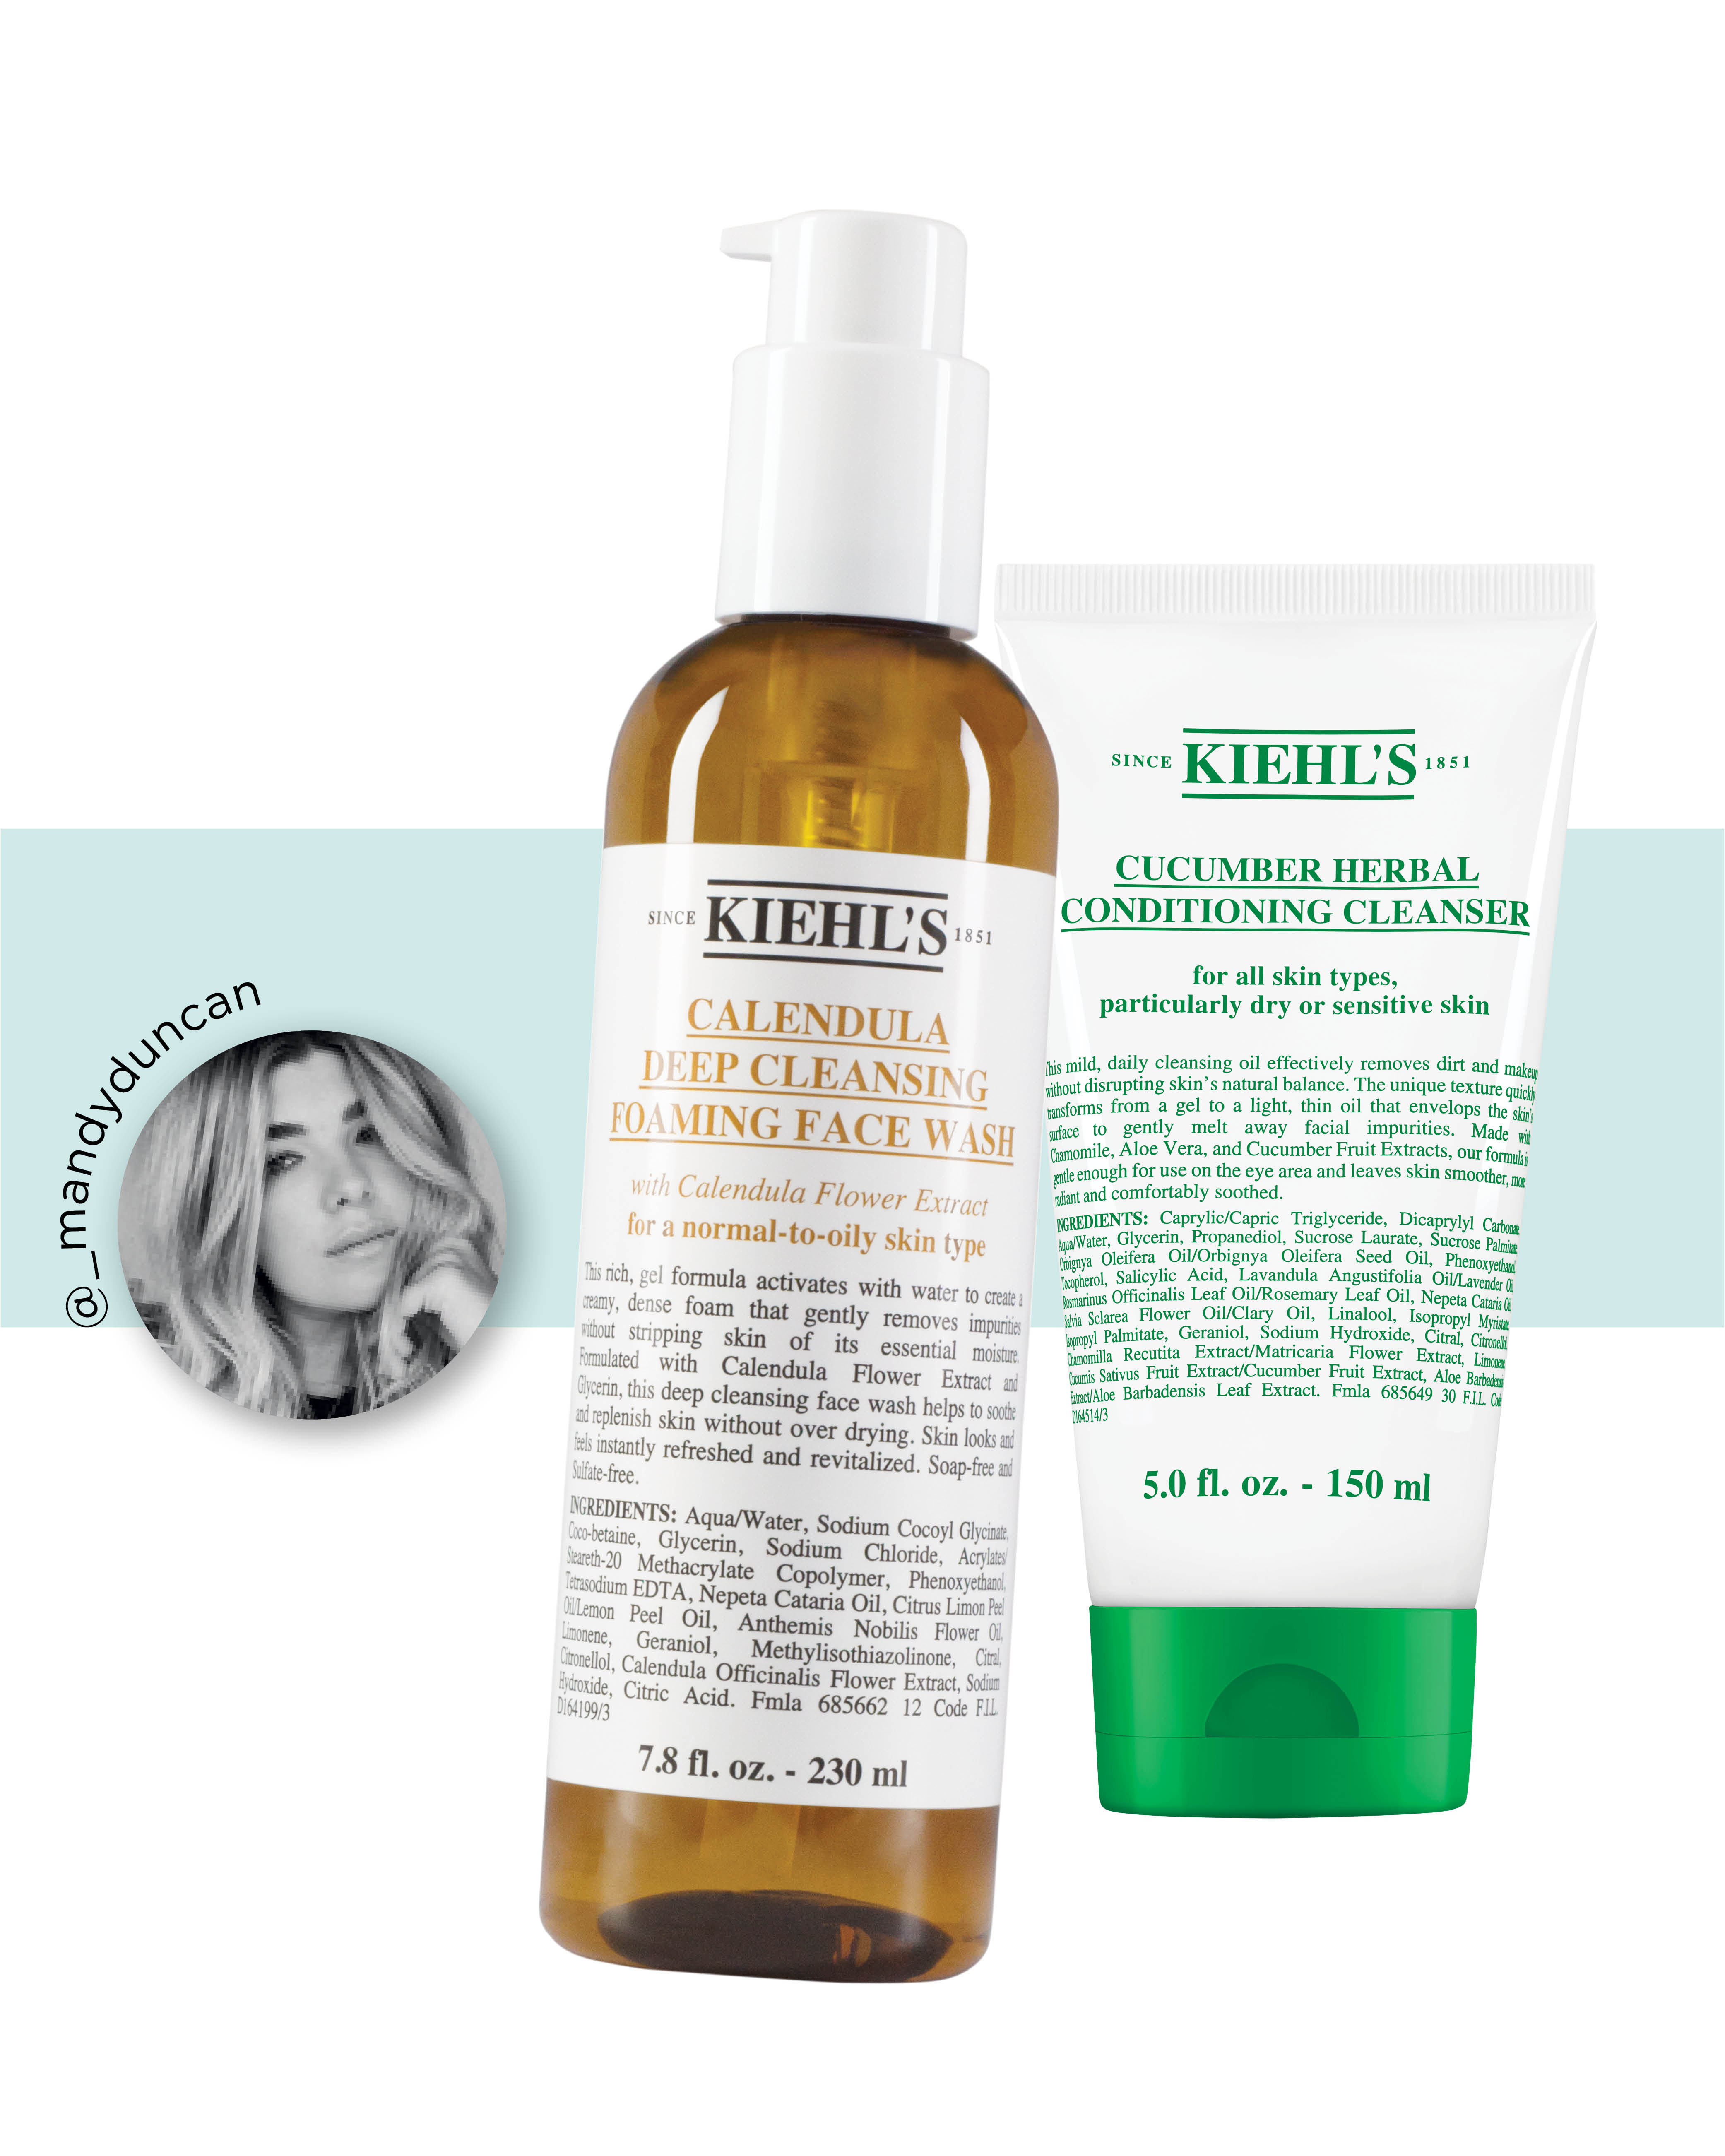 Kiehl’s Calendula Deep Cleansing Foaming Face Wash, $52, and Cucumber Herbal Conditioning Cleanser, $42. I cleanse first with the foaming wash, then the cucumber one. It makes you feel so fresh. You don’t realise how much stuff is still on your face if you only do it once. I follow up with a calendula toner.